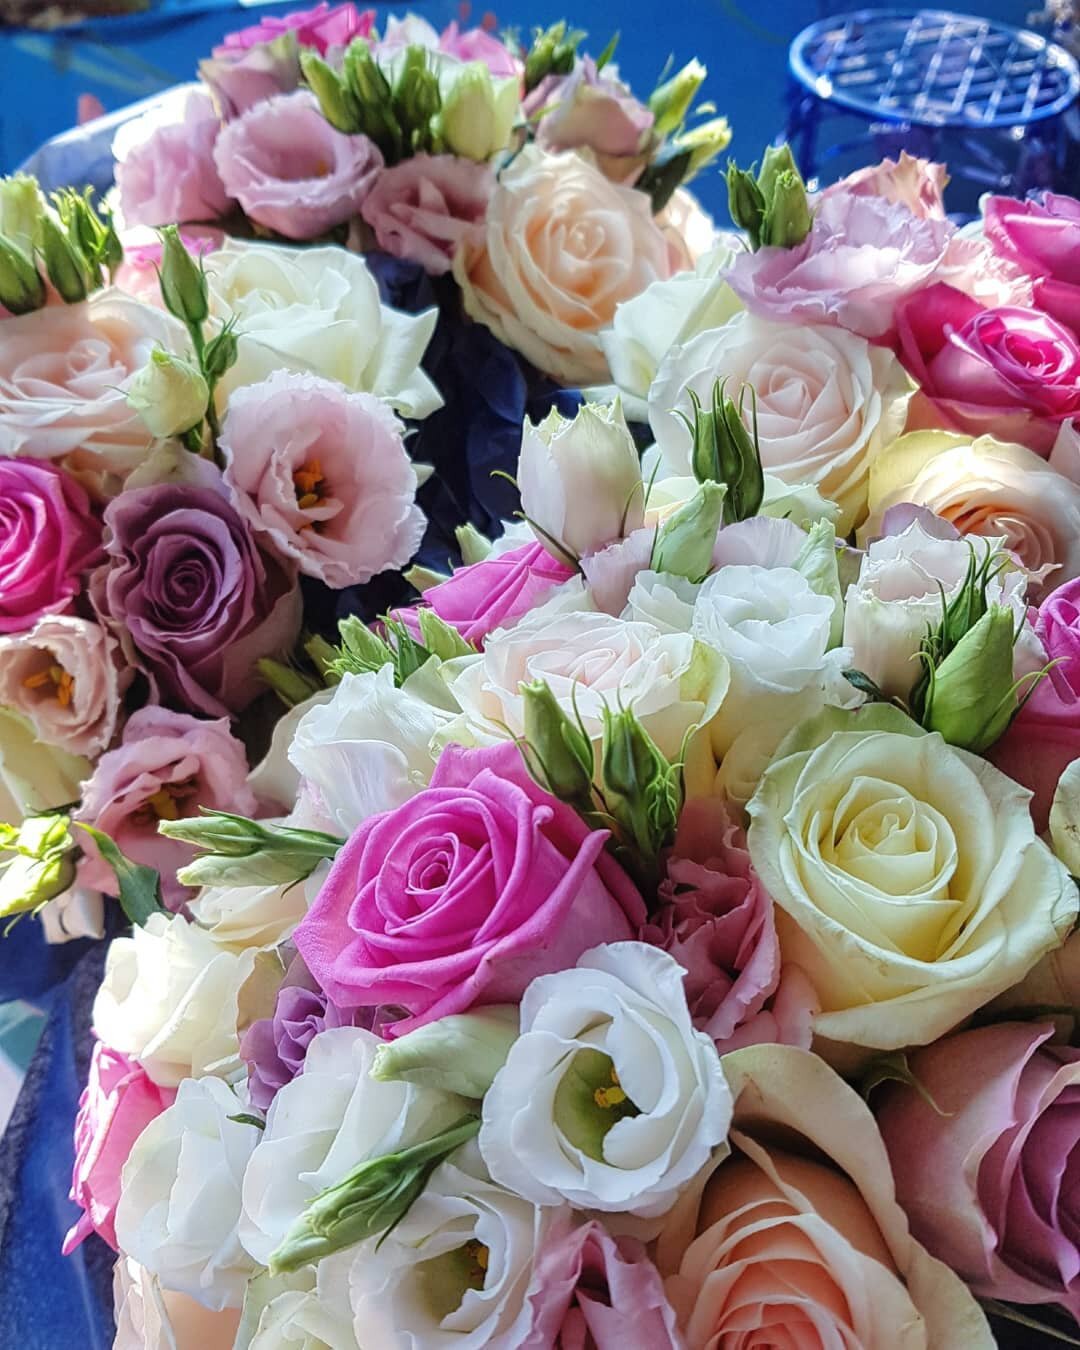 Order of the day 🌹

Roses, roses and more roses!

All our girls have gone full on roses for this week's weddings and we can't wait to see the pictures of their big day!

It's always a pleasure to play our small part in such a special day 🌸

With Lo